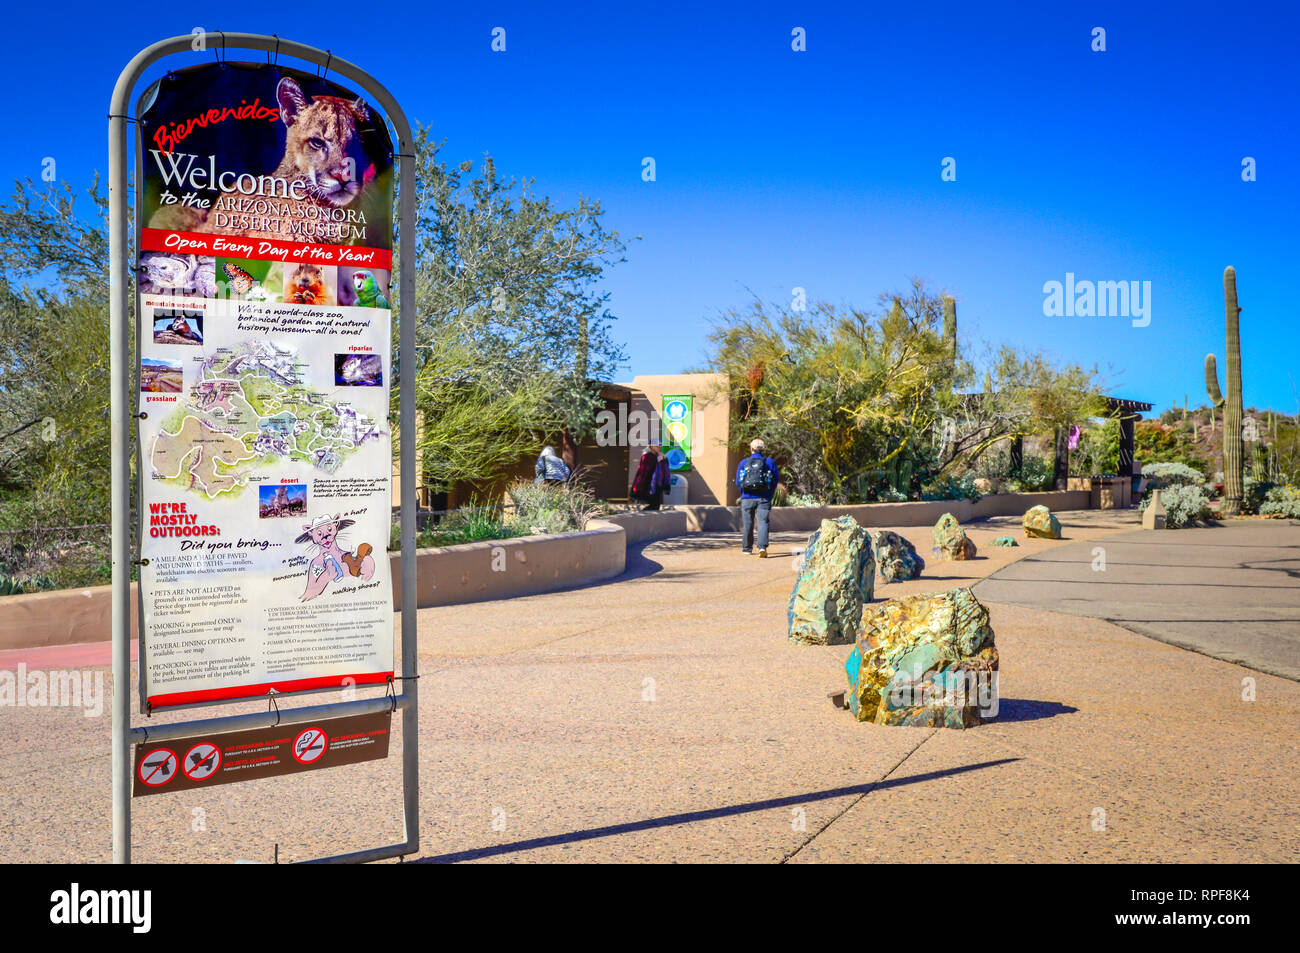 An informational signboard welcomes visitors in front of the Arizona-Sonora Desert Museum entrance in Tucson, AZ, USA Stock Photo